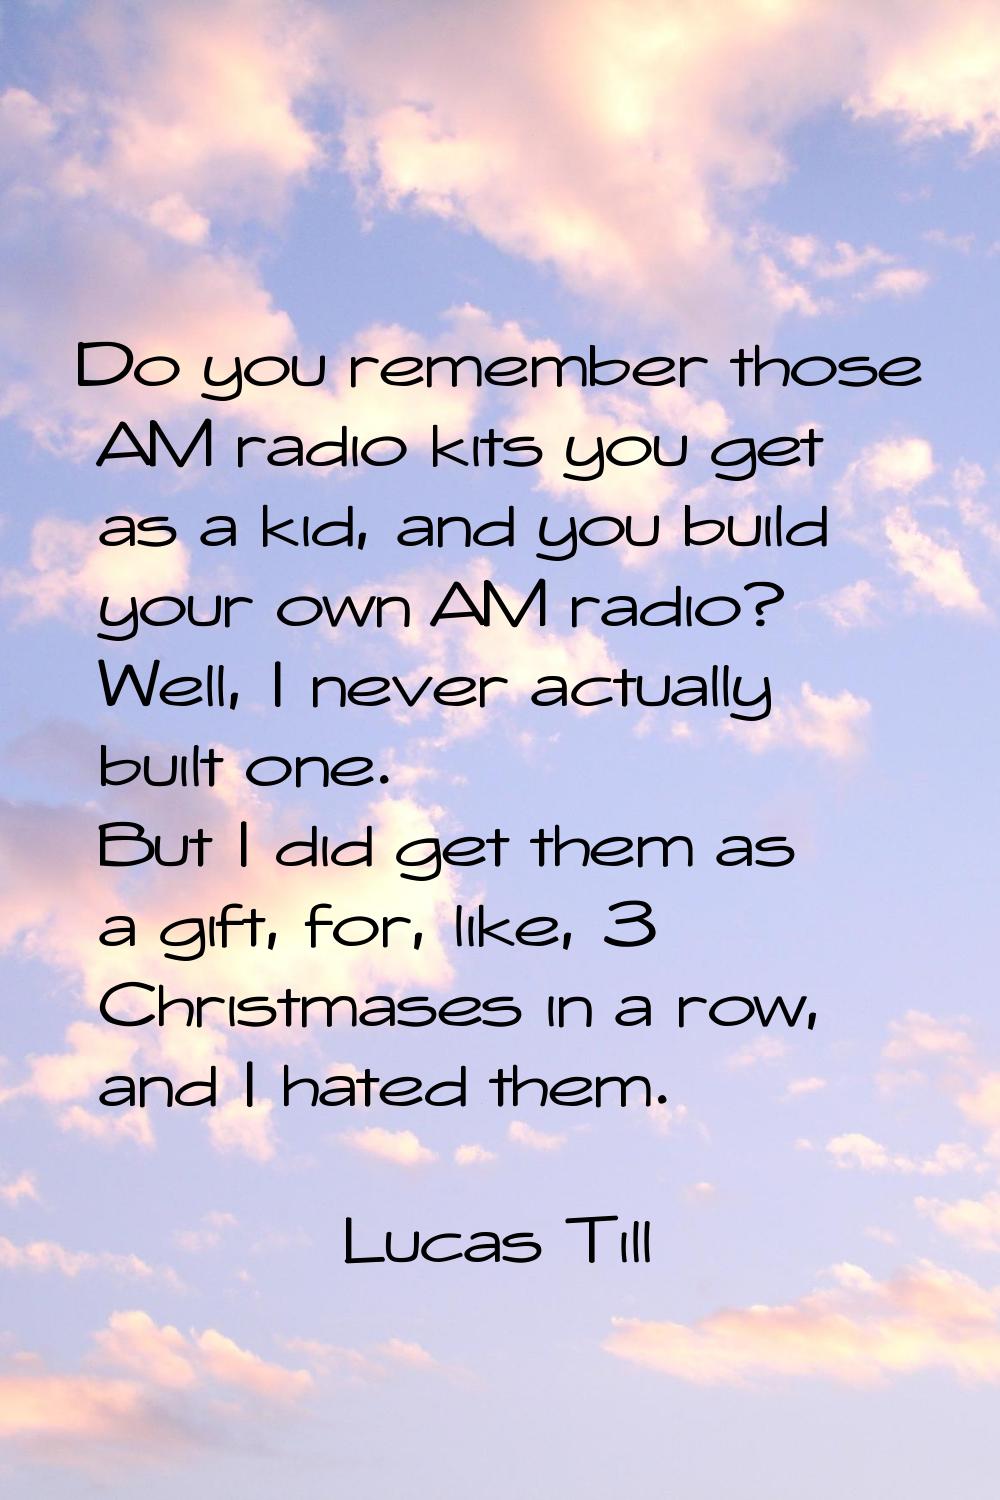 Do you remember those AM radio kits you get as a kid, and you build your own AM radio? Well, I neve